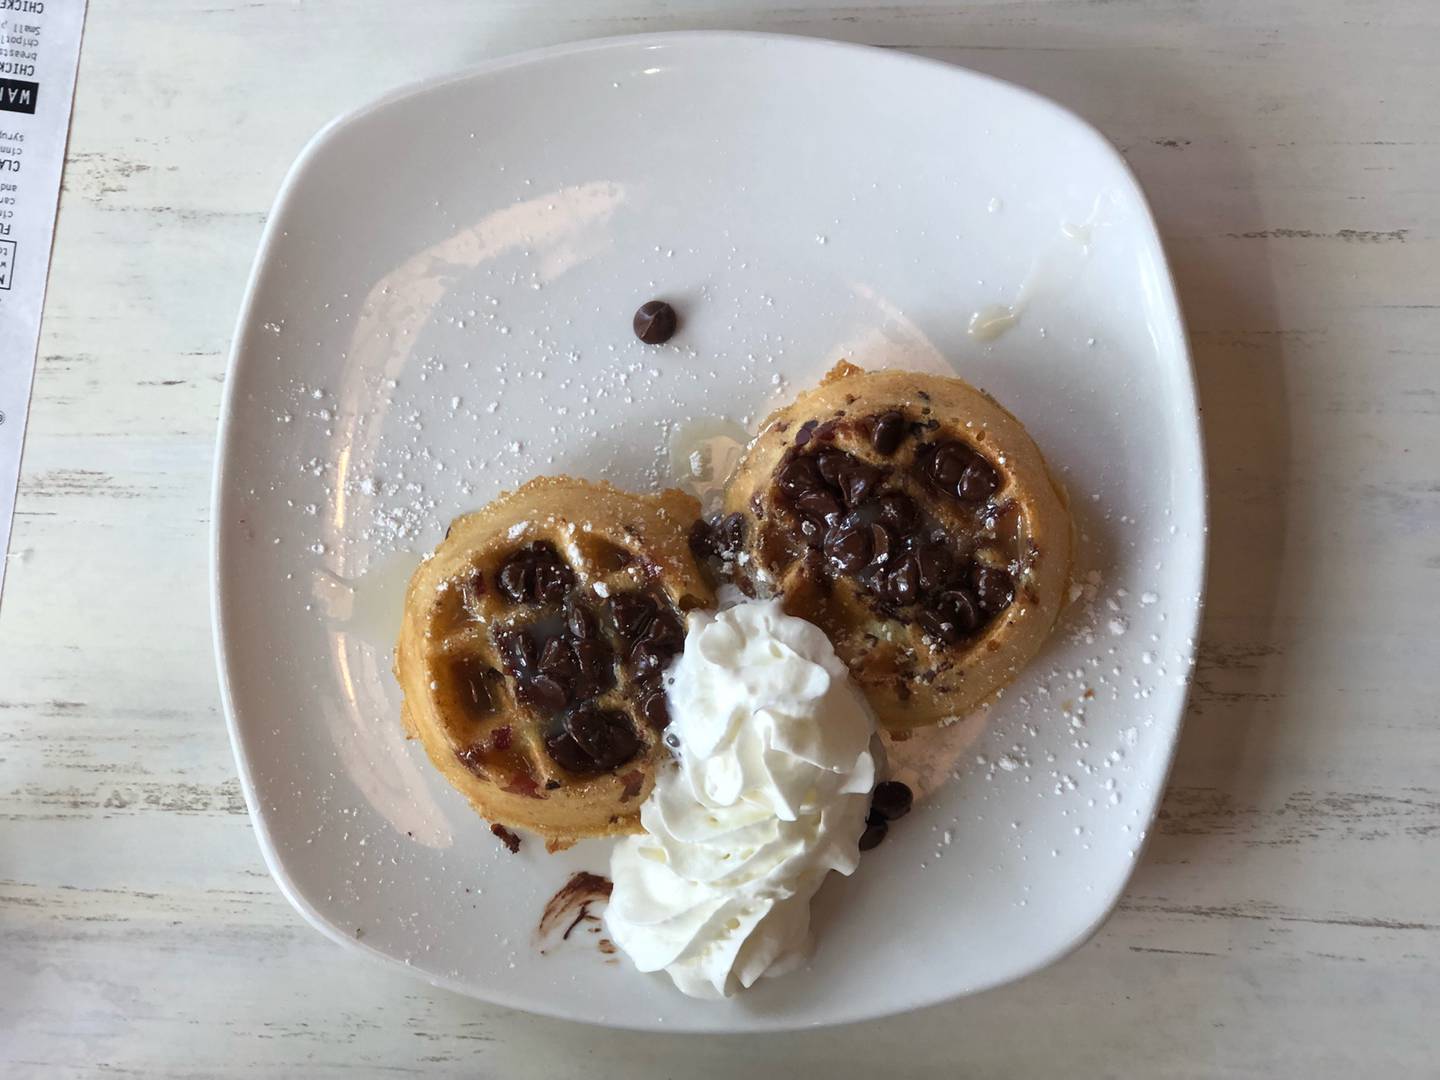 Side order of chocolate chip pancakes stuffed with bits of real topped off with whipped cream and chocolate drizzle at Syrup in Algonquin.